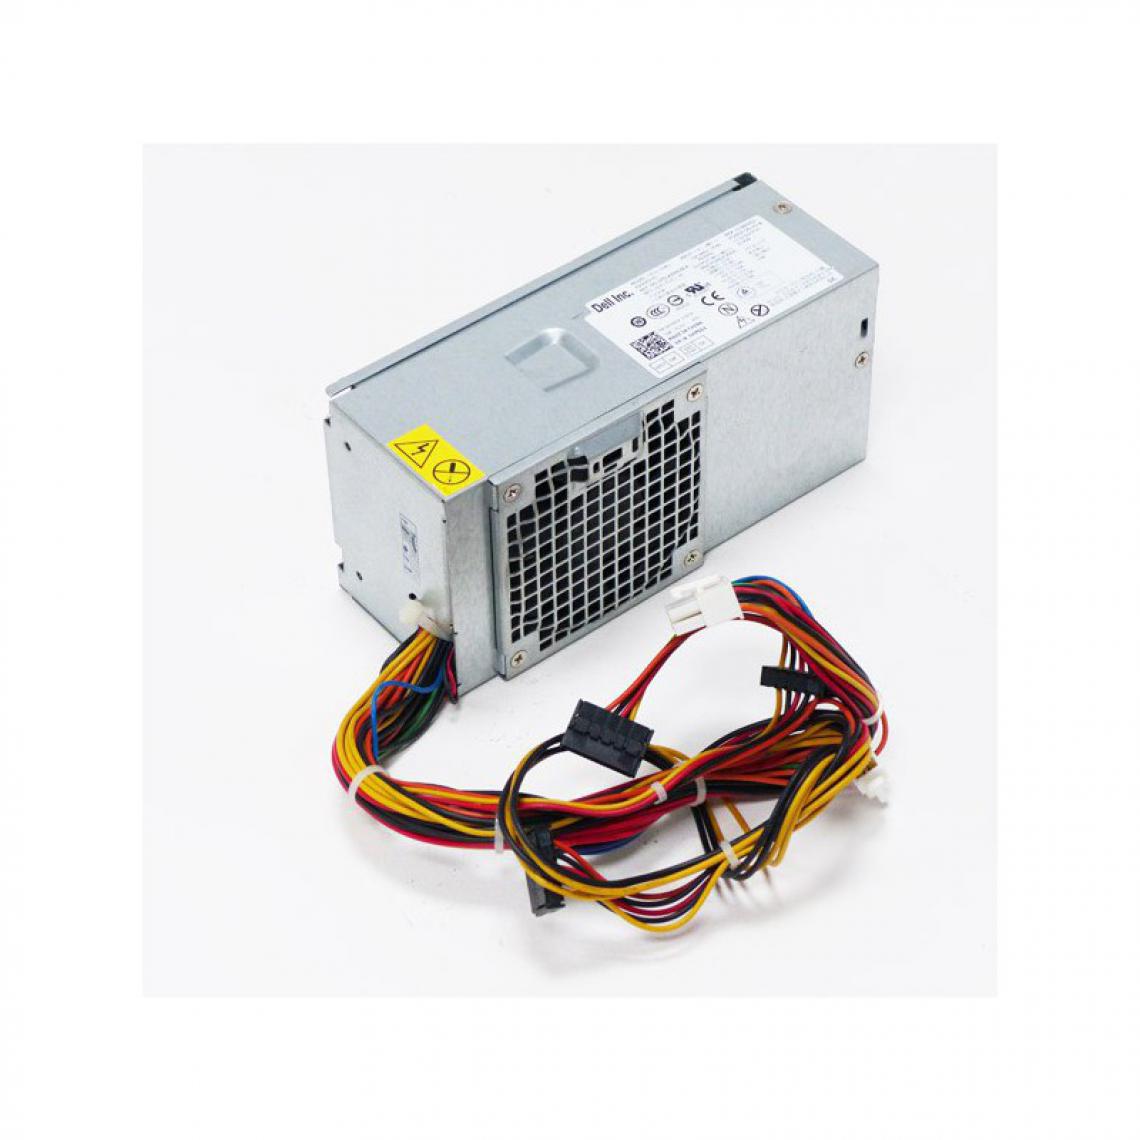 Dell - Alimentation DELL Optiplex 390 DT L250AD-00 PS-5251-01D FY9H3 250W Power Supply - Alimentation modulaire